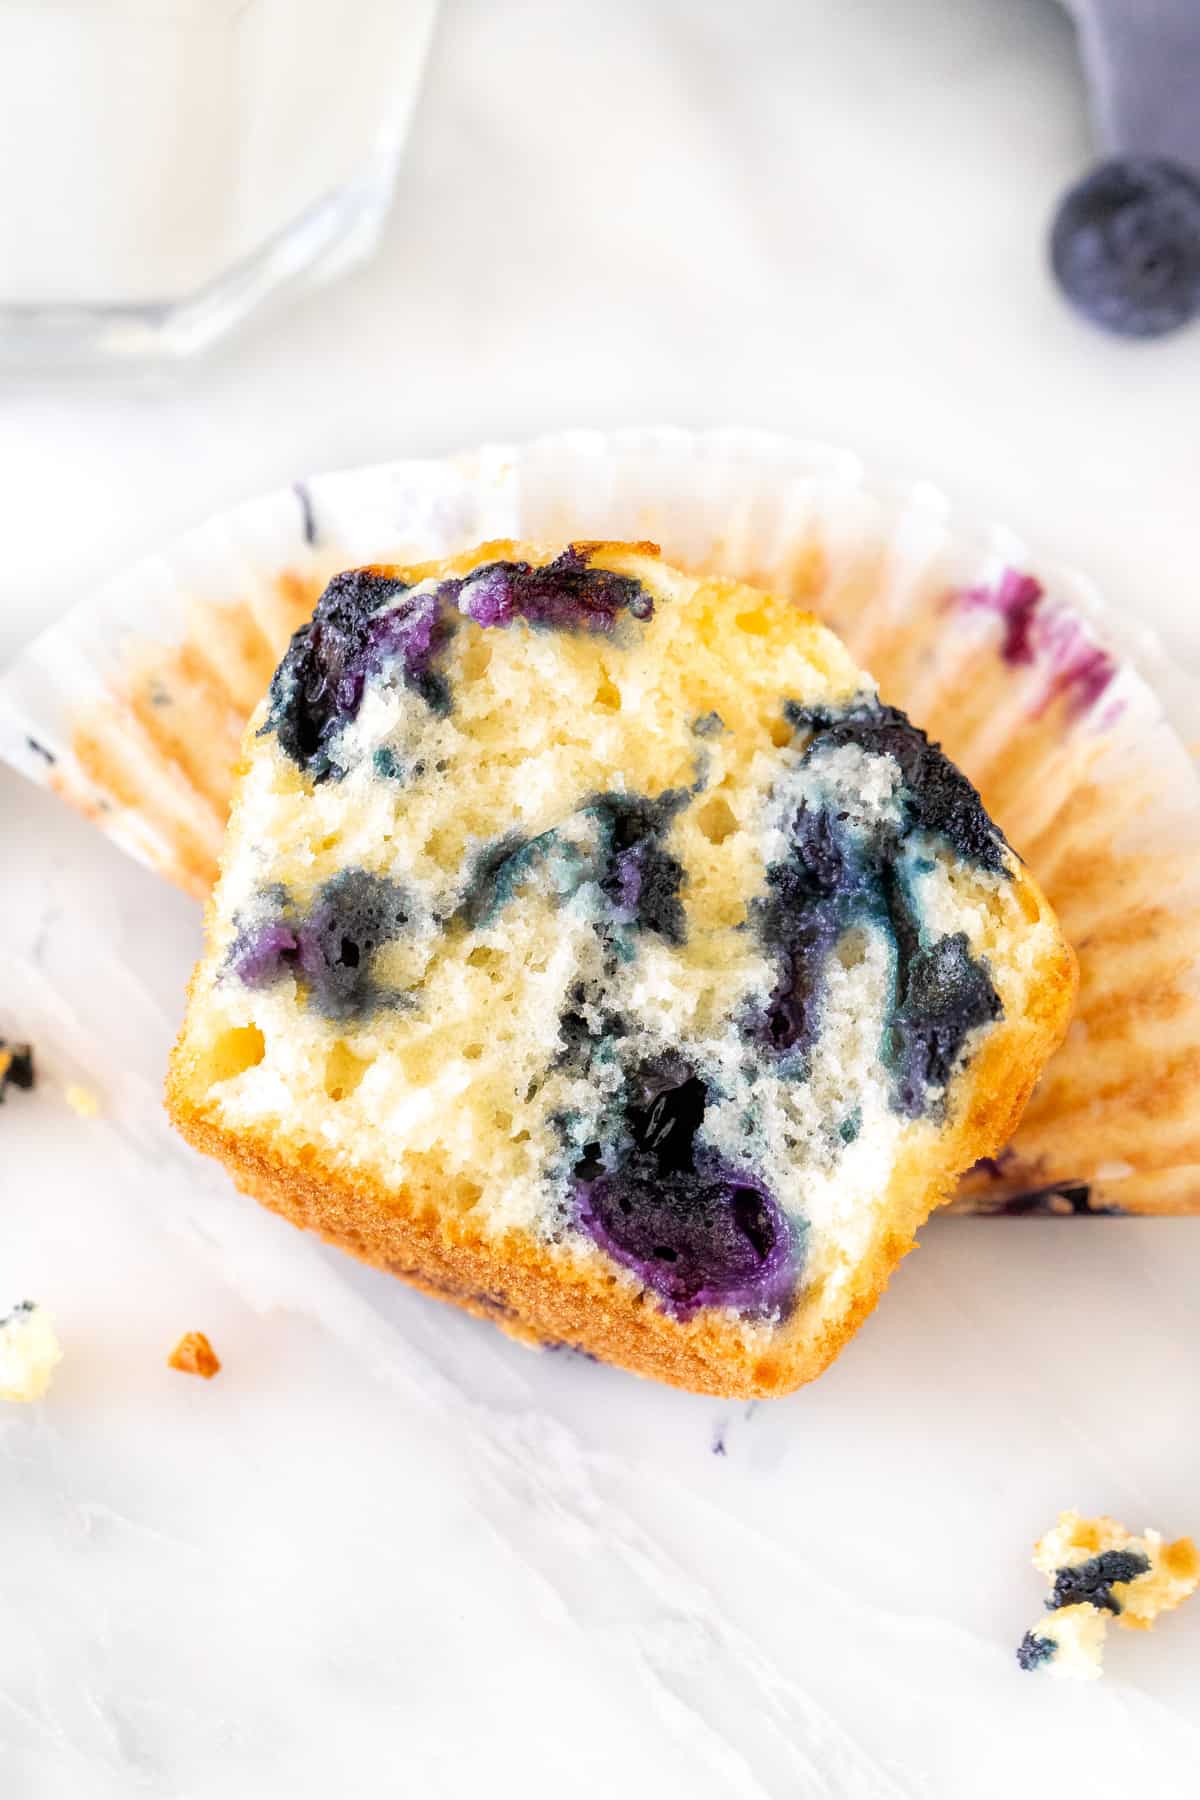 Half of a blueberry muffin